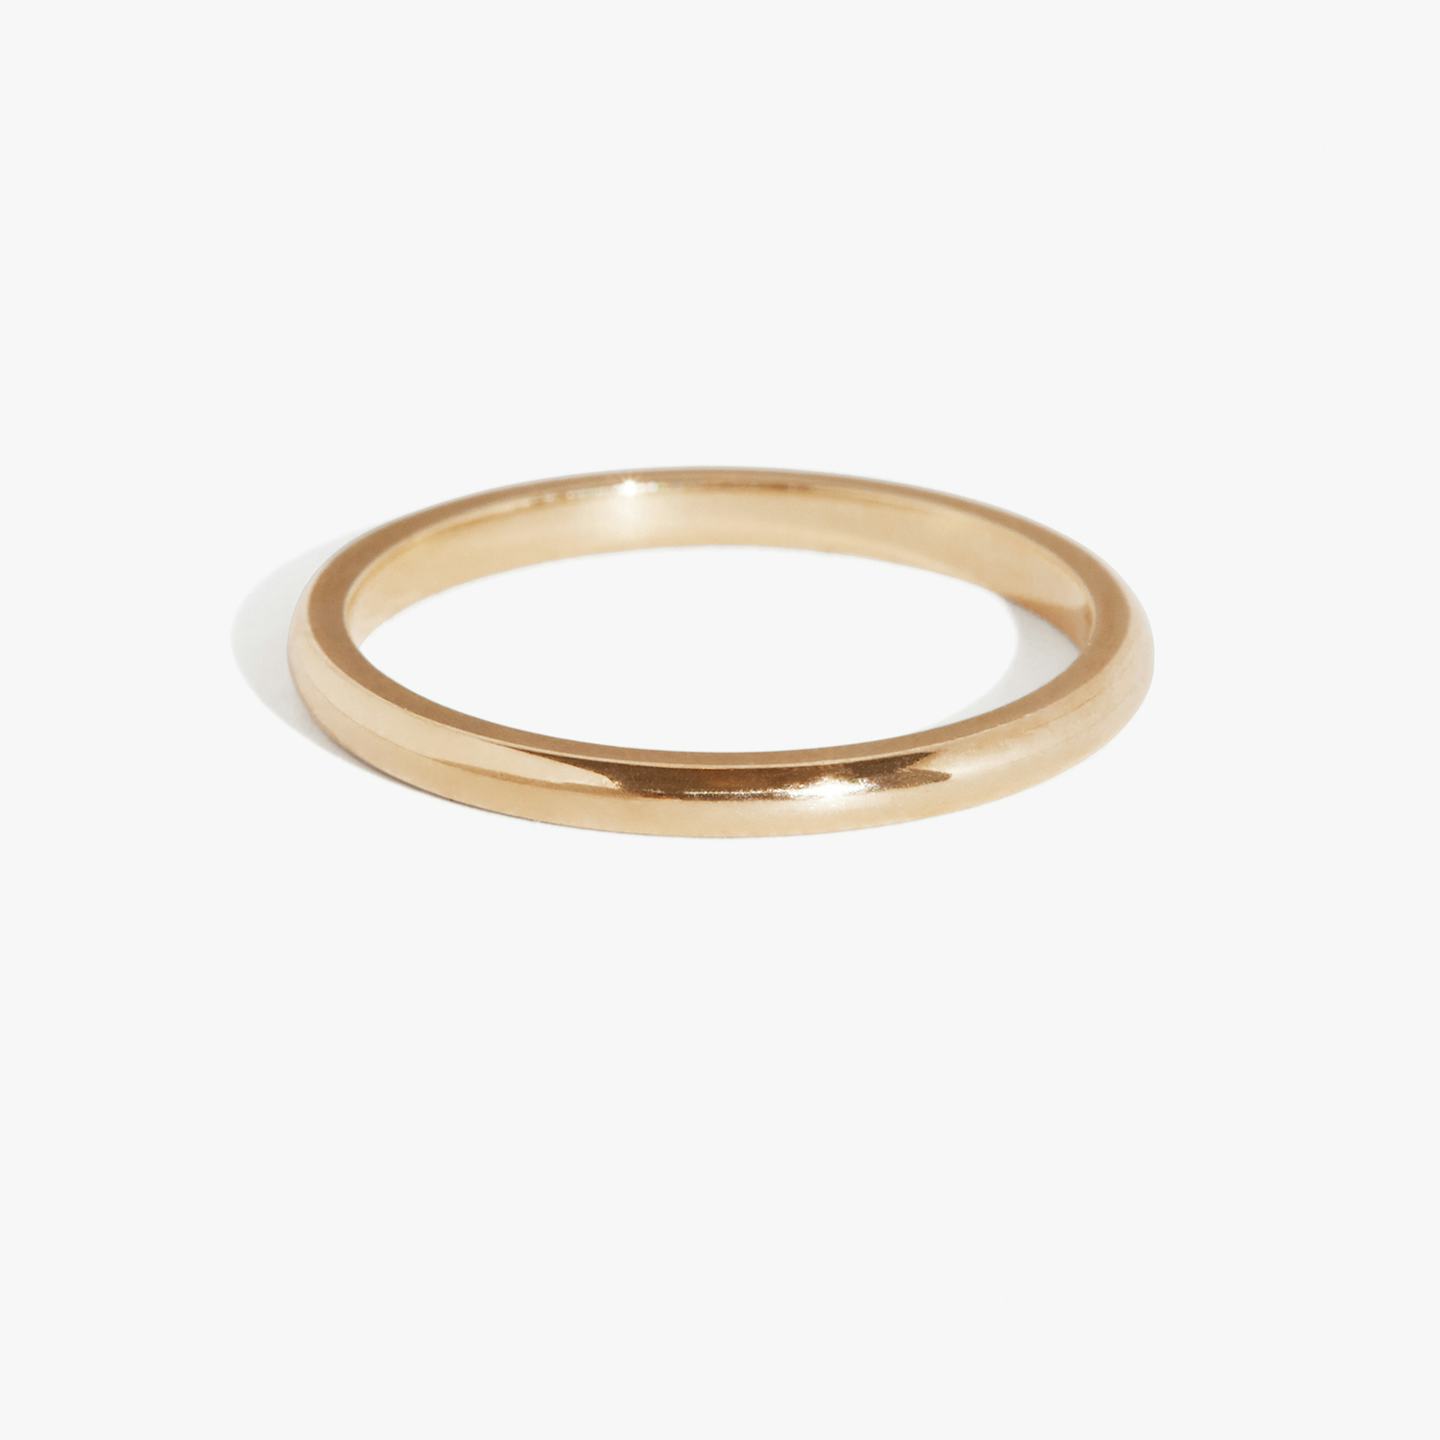 The Round | 14k | 14k Rose Gold | Band width: Small - 1.5mm